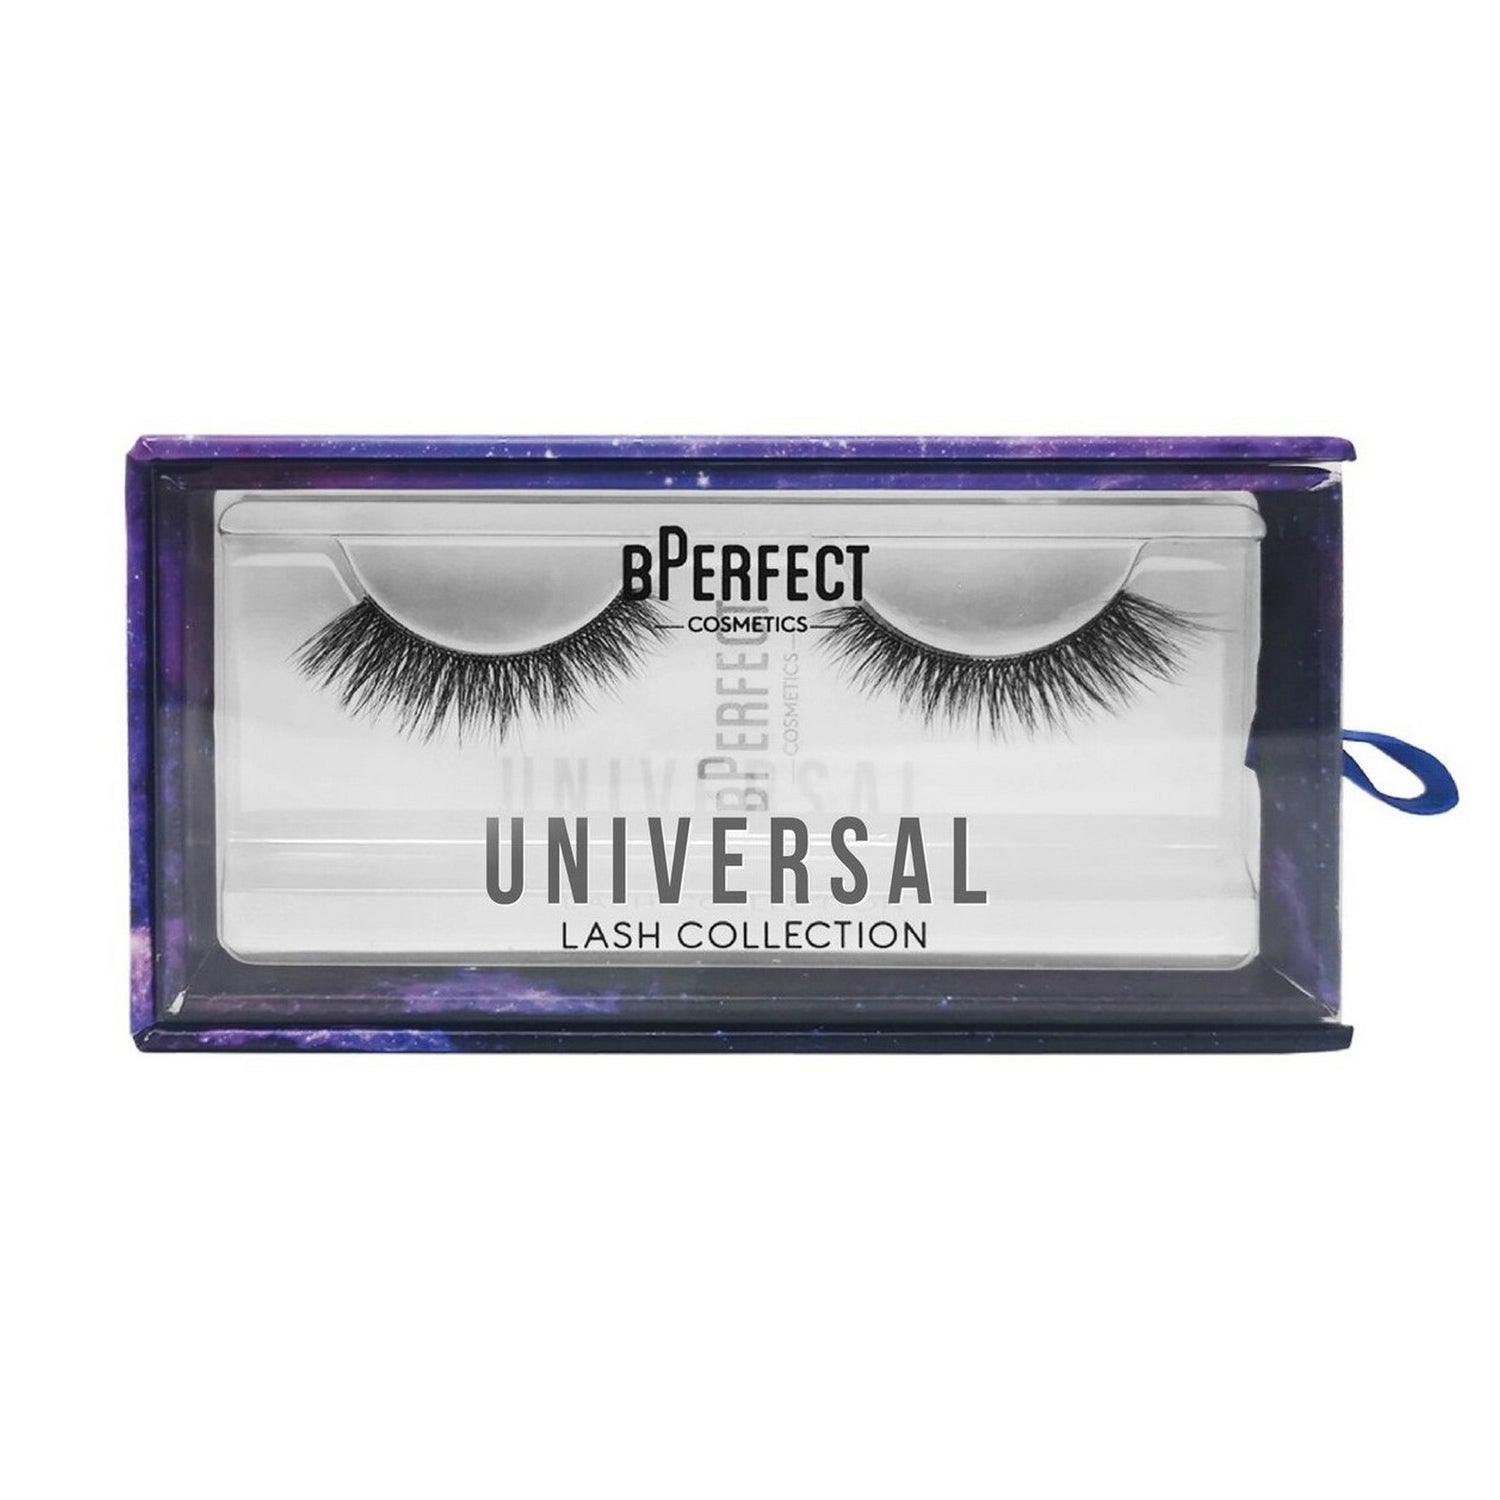 BPERFECT Inspire Lash Collection 35D Silk Lashes